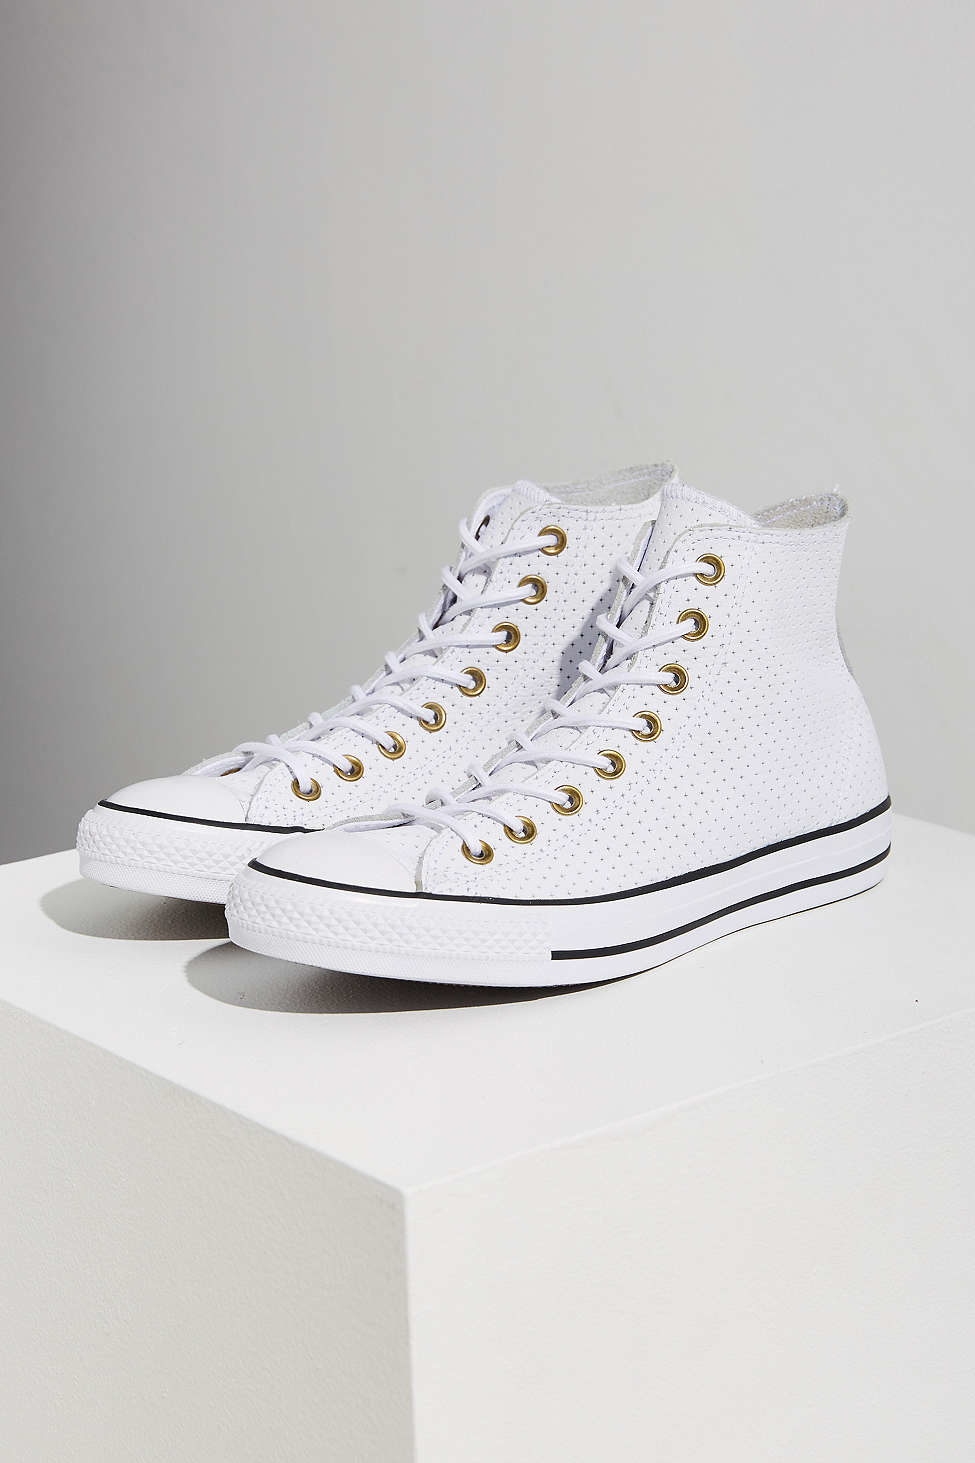 Converse Chuck Taylor Perforated Leather Sneaker in White - Lyst